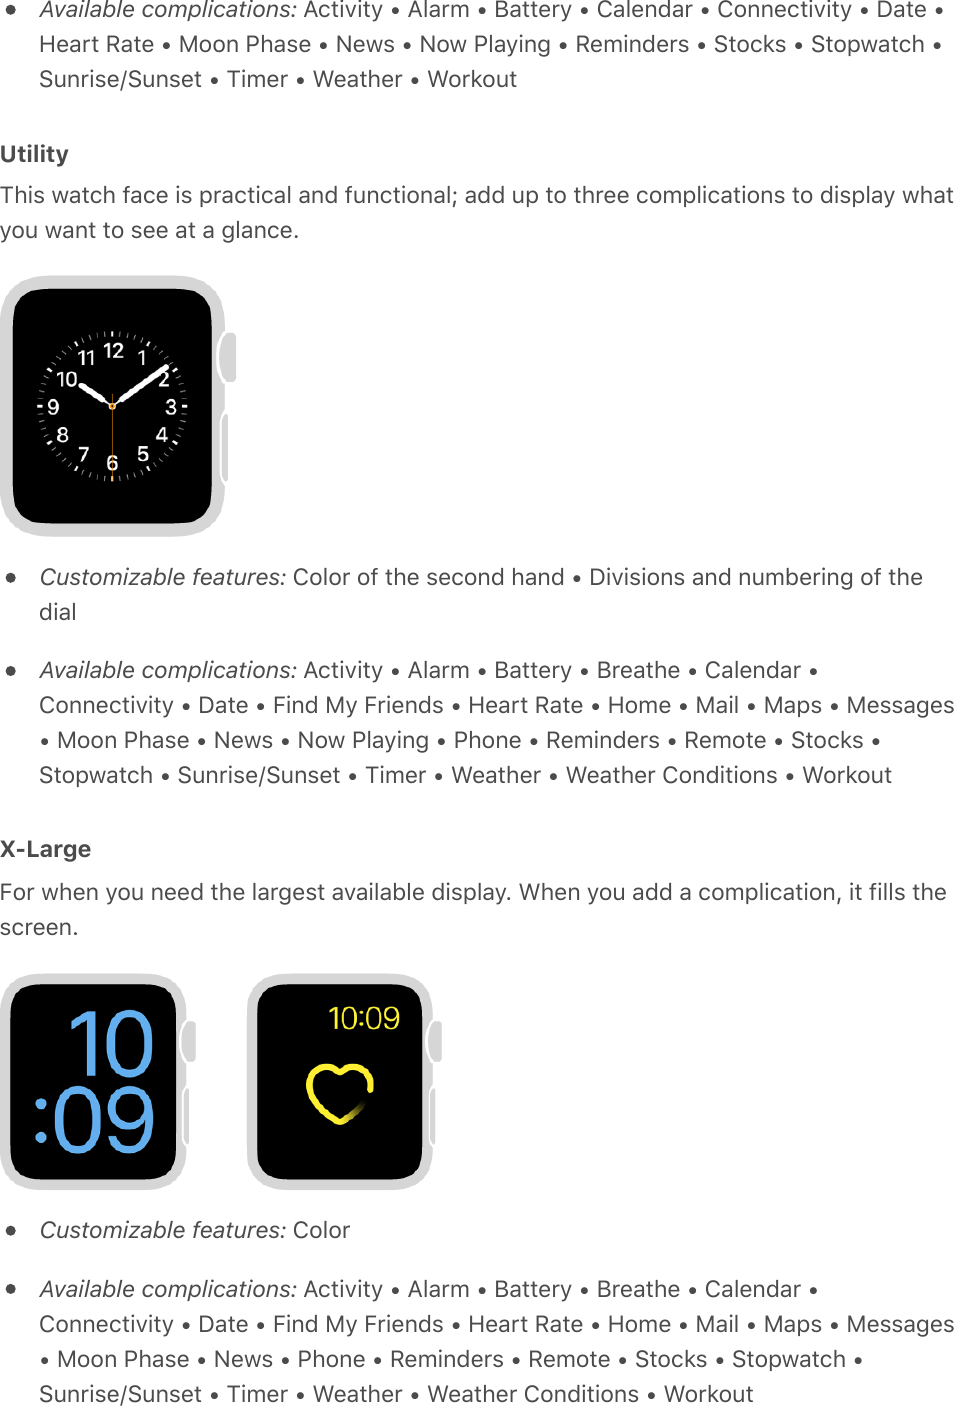 Available complications: Activity • Alarm • Battery • Calendar • Connectivity • Date •Heart Rate • Moon Phase • News • Now Playing • Reminders • Stocks • Stopwatch •Sunrise/Sunset • Timer • Weather • WorkoutUtilityThis watch face is practical and functional; add up to three complications to display whatyou want to see at a glance.Customizable features: Color of the second hand • Divisions and numbering of thedialAvailable complications: Activity • Alarm • Battery • Breathe • Calendar •Connectivity • Date • Find My Friends • Heart Rate • Home • Mail • Maps • Messages• Moon Phase • News • Now Playing • Phone • Reminders • Remote • Stocks •Stopwatch • Sunrise/Sunset • Timer • Weather • Weather Conditions • WorkoutX-LargeFor when you need the largest available display. When you add a complication, it fills thescreen.Customizable features: ColorAvailable complications: Activity • Alarm • Battery • Breathe • Calendar •Connectivity • Date • Find My Friends • Heart Rate • Home • Mail • Maps • Messages• Moon Phase • News • Phone • Reminders • Remote • Stocks • Stopwatch •Sunrise/Sunset • Timer • Weather • Weather Conditions • Workout